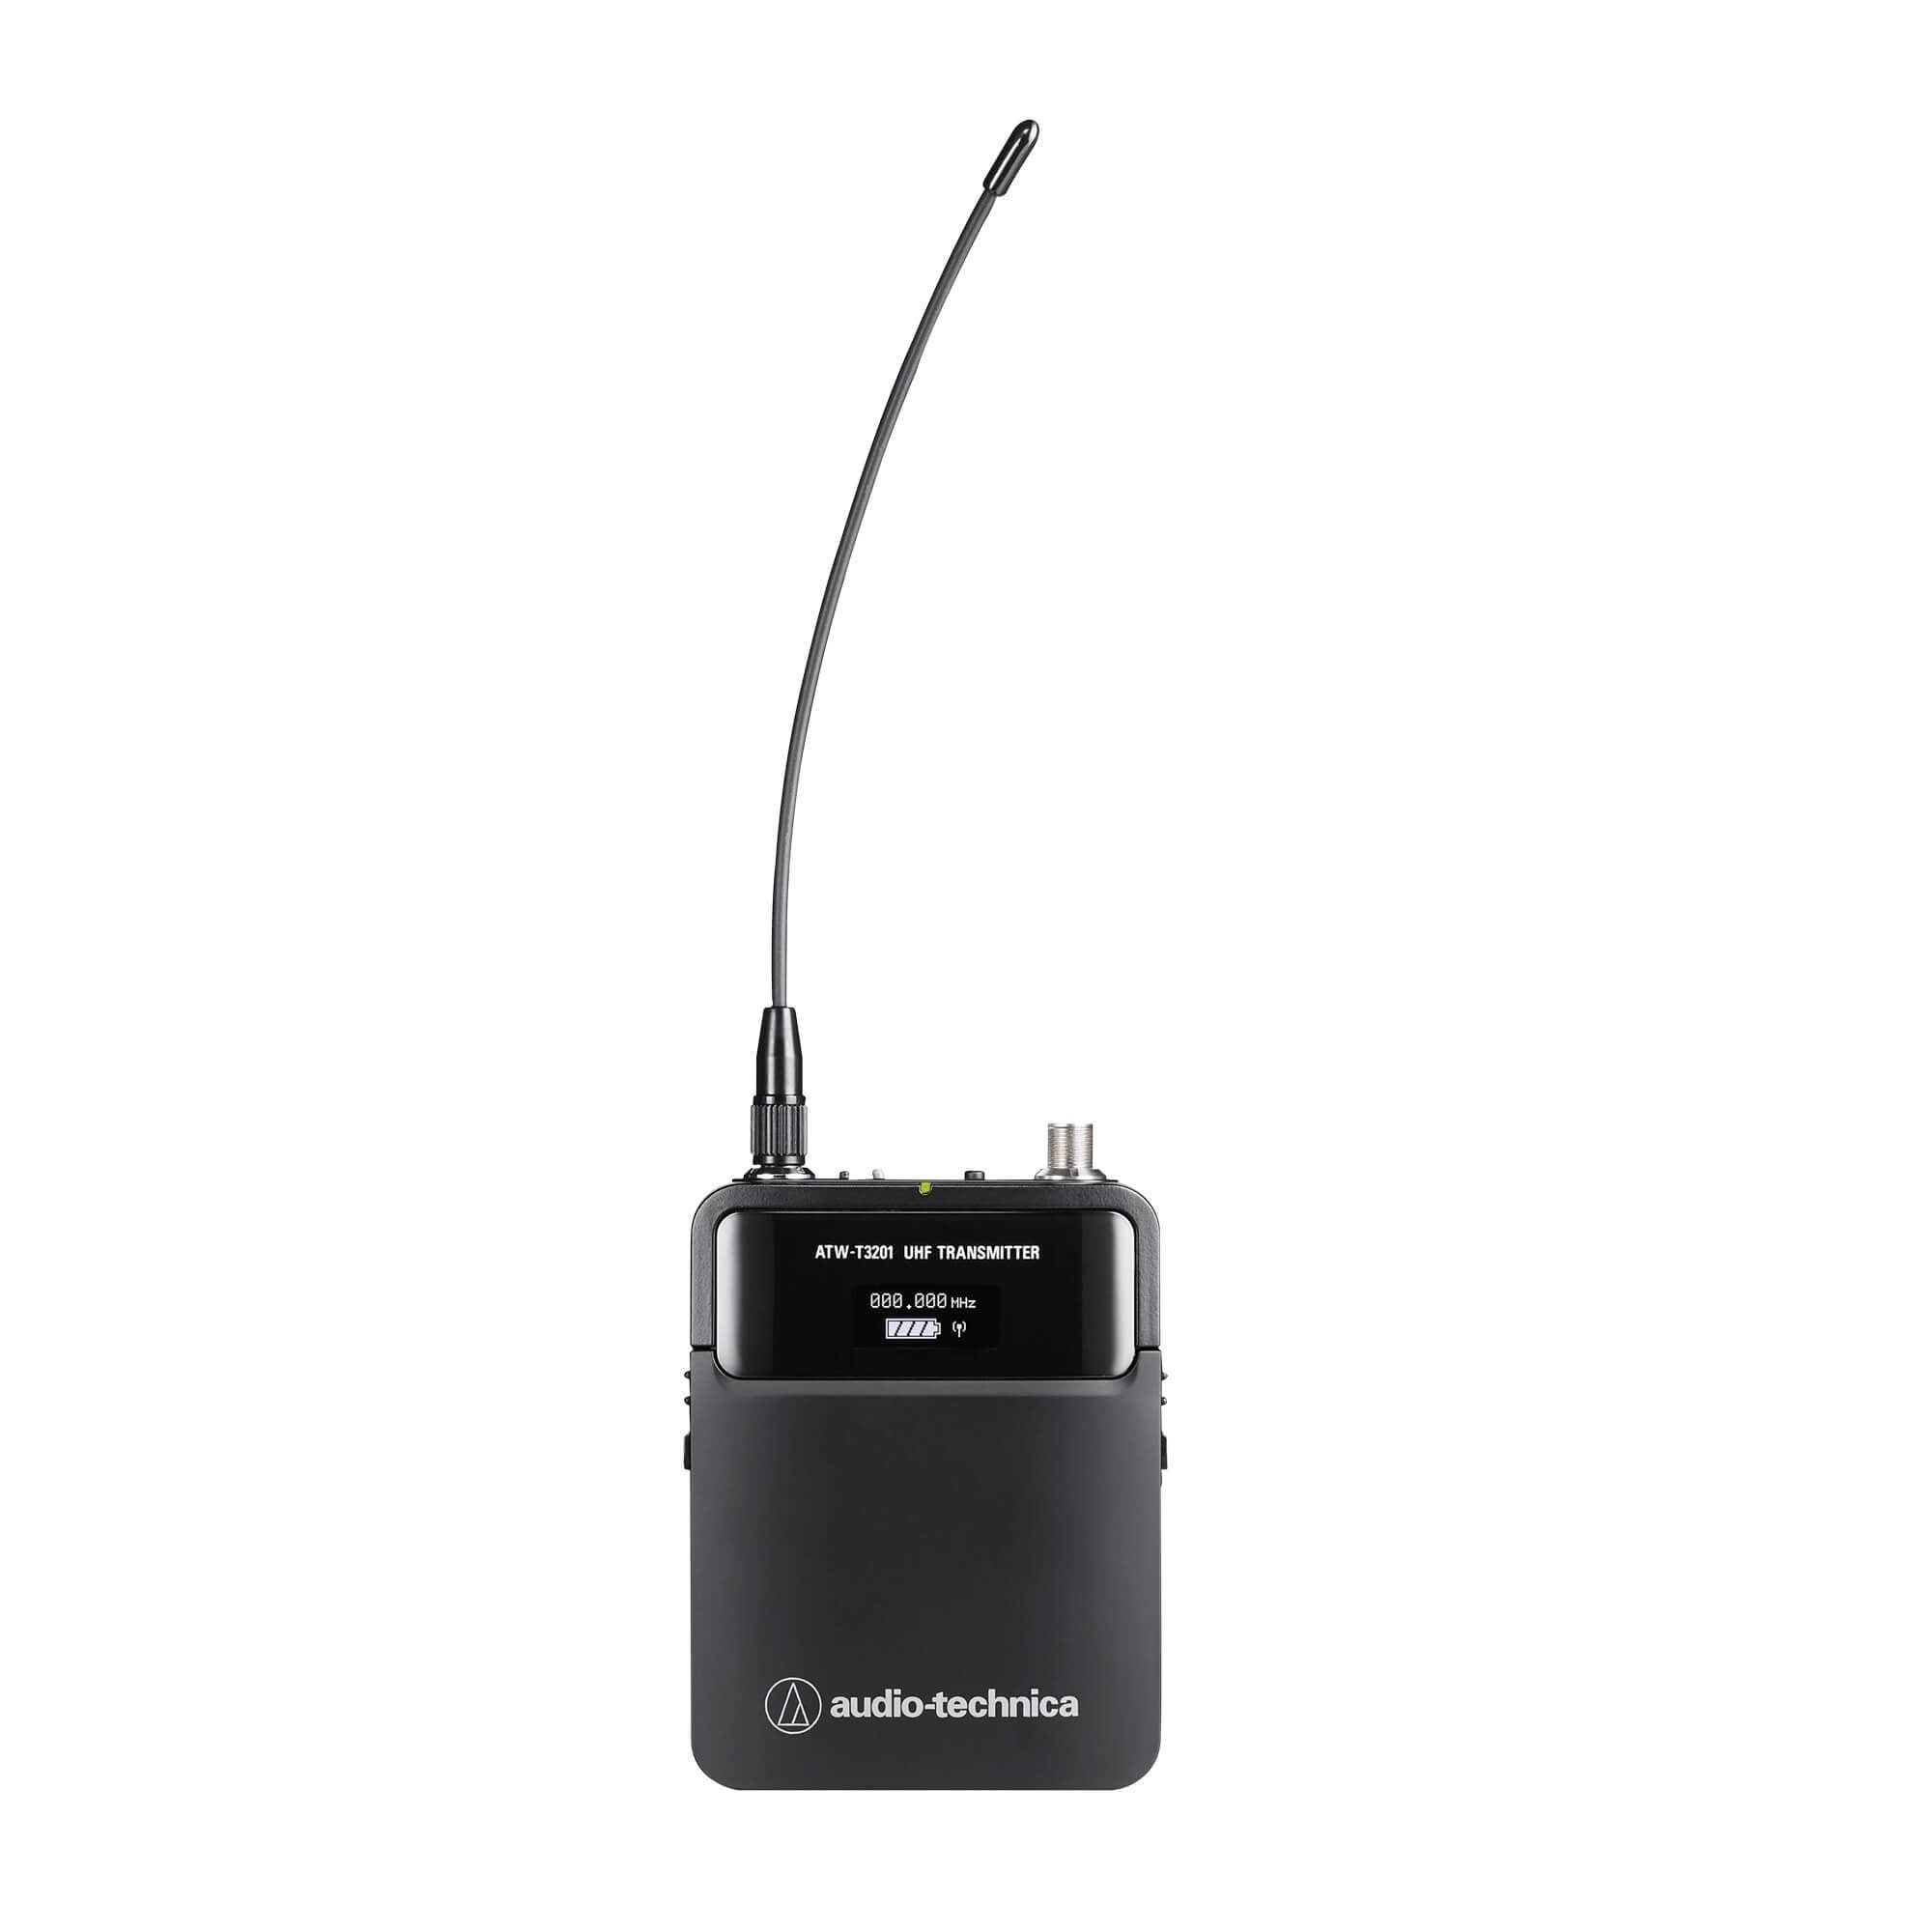 Audio-Technica ATW-T3201 - Body-Pack Transmitter (3000 Series), front